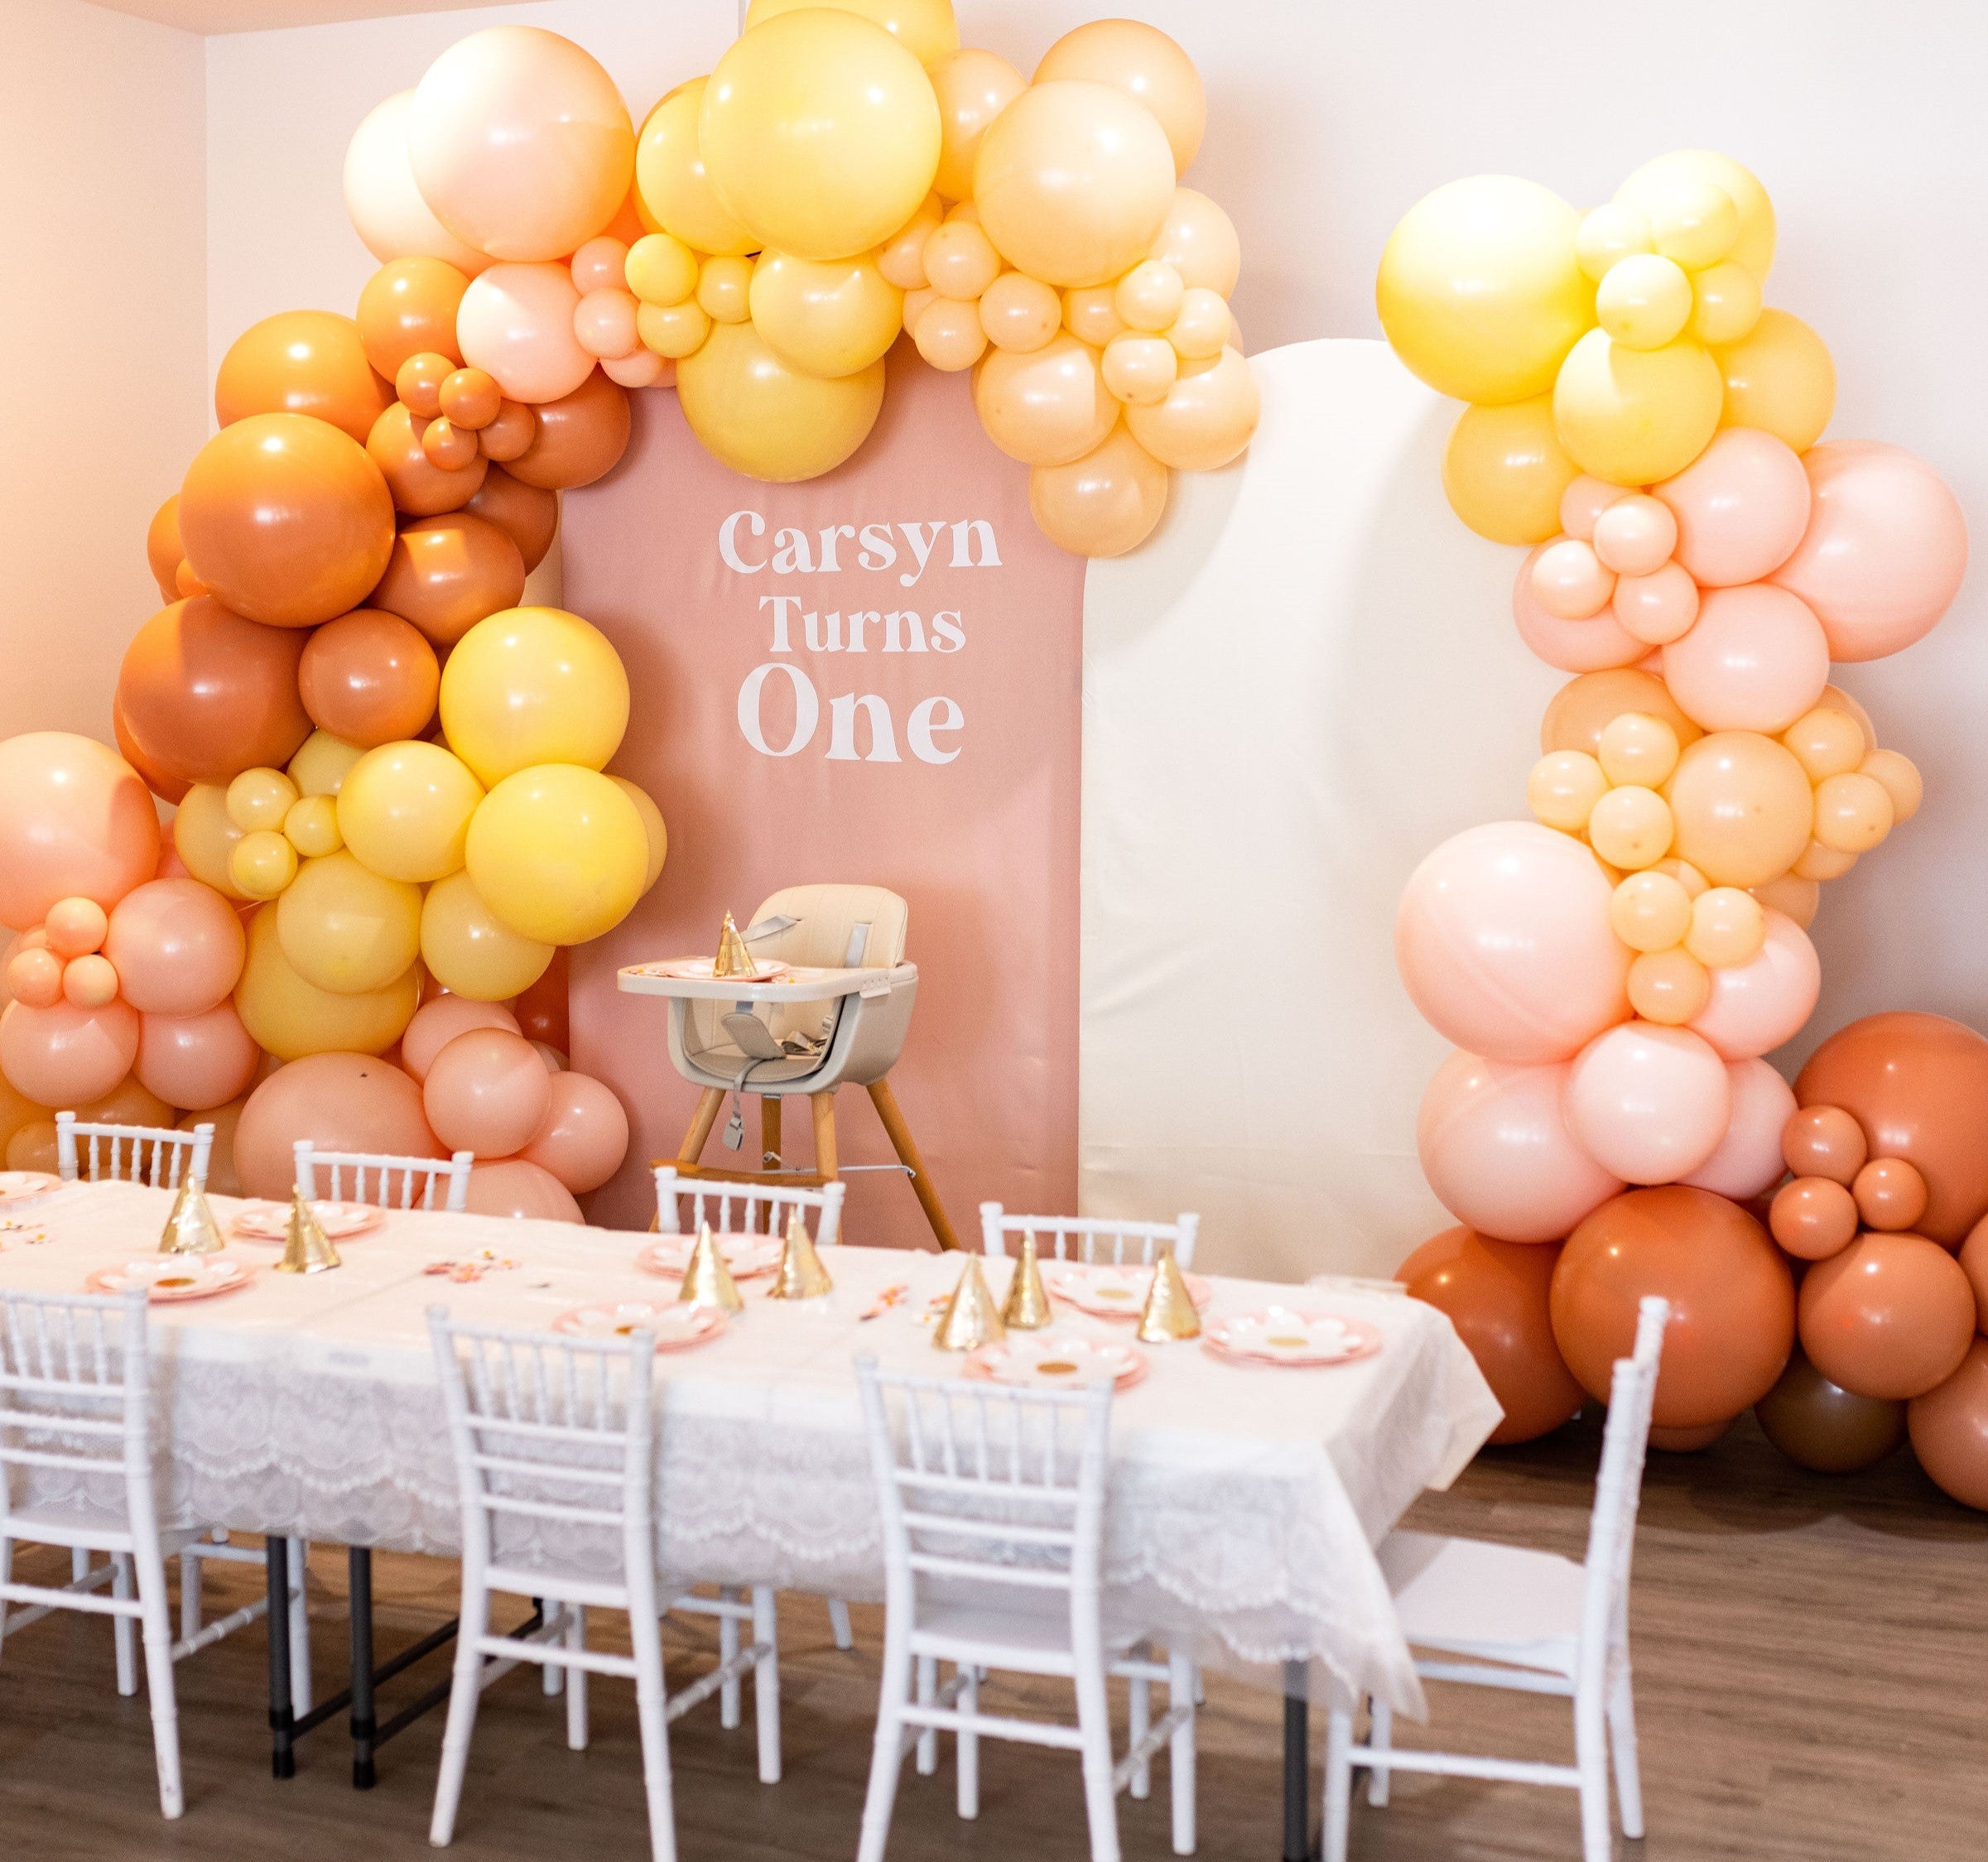 A charming boho-themed balloon garland, perfect for a little one's 1st birthday celebration, adding a whimsical touch to the party decor